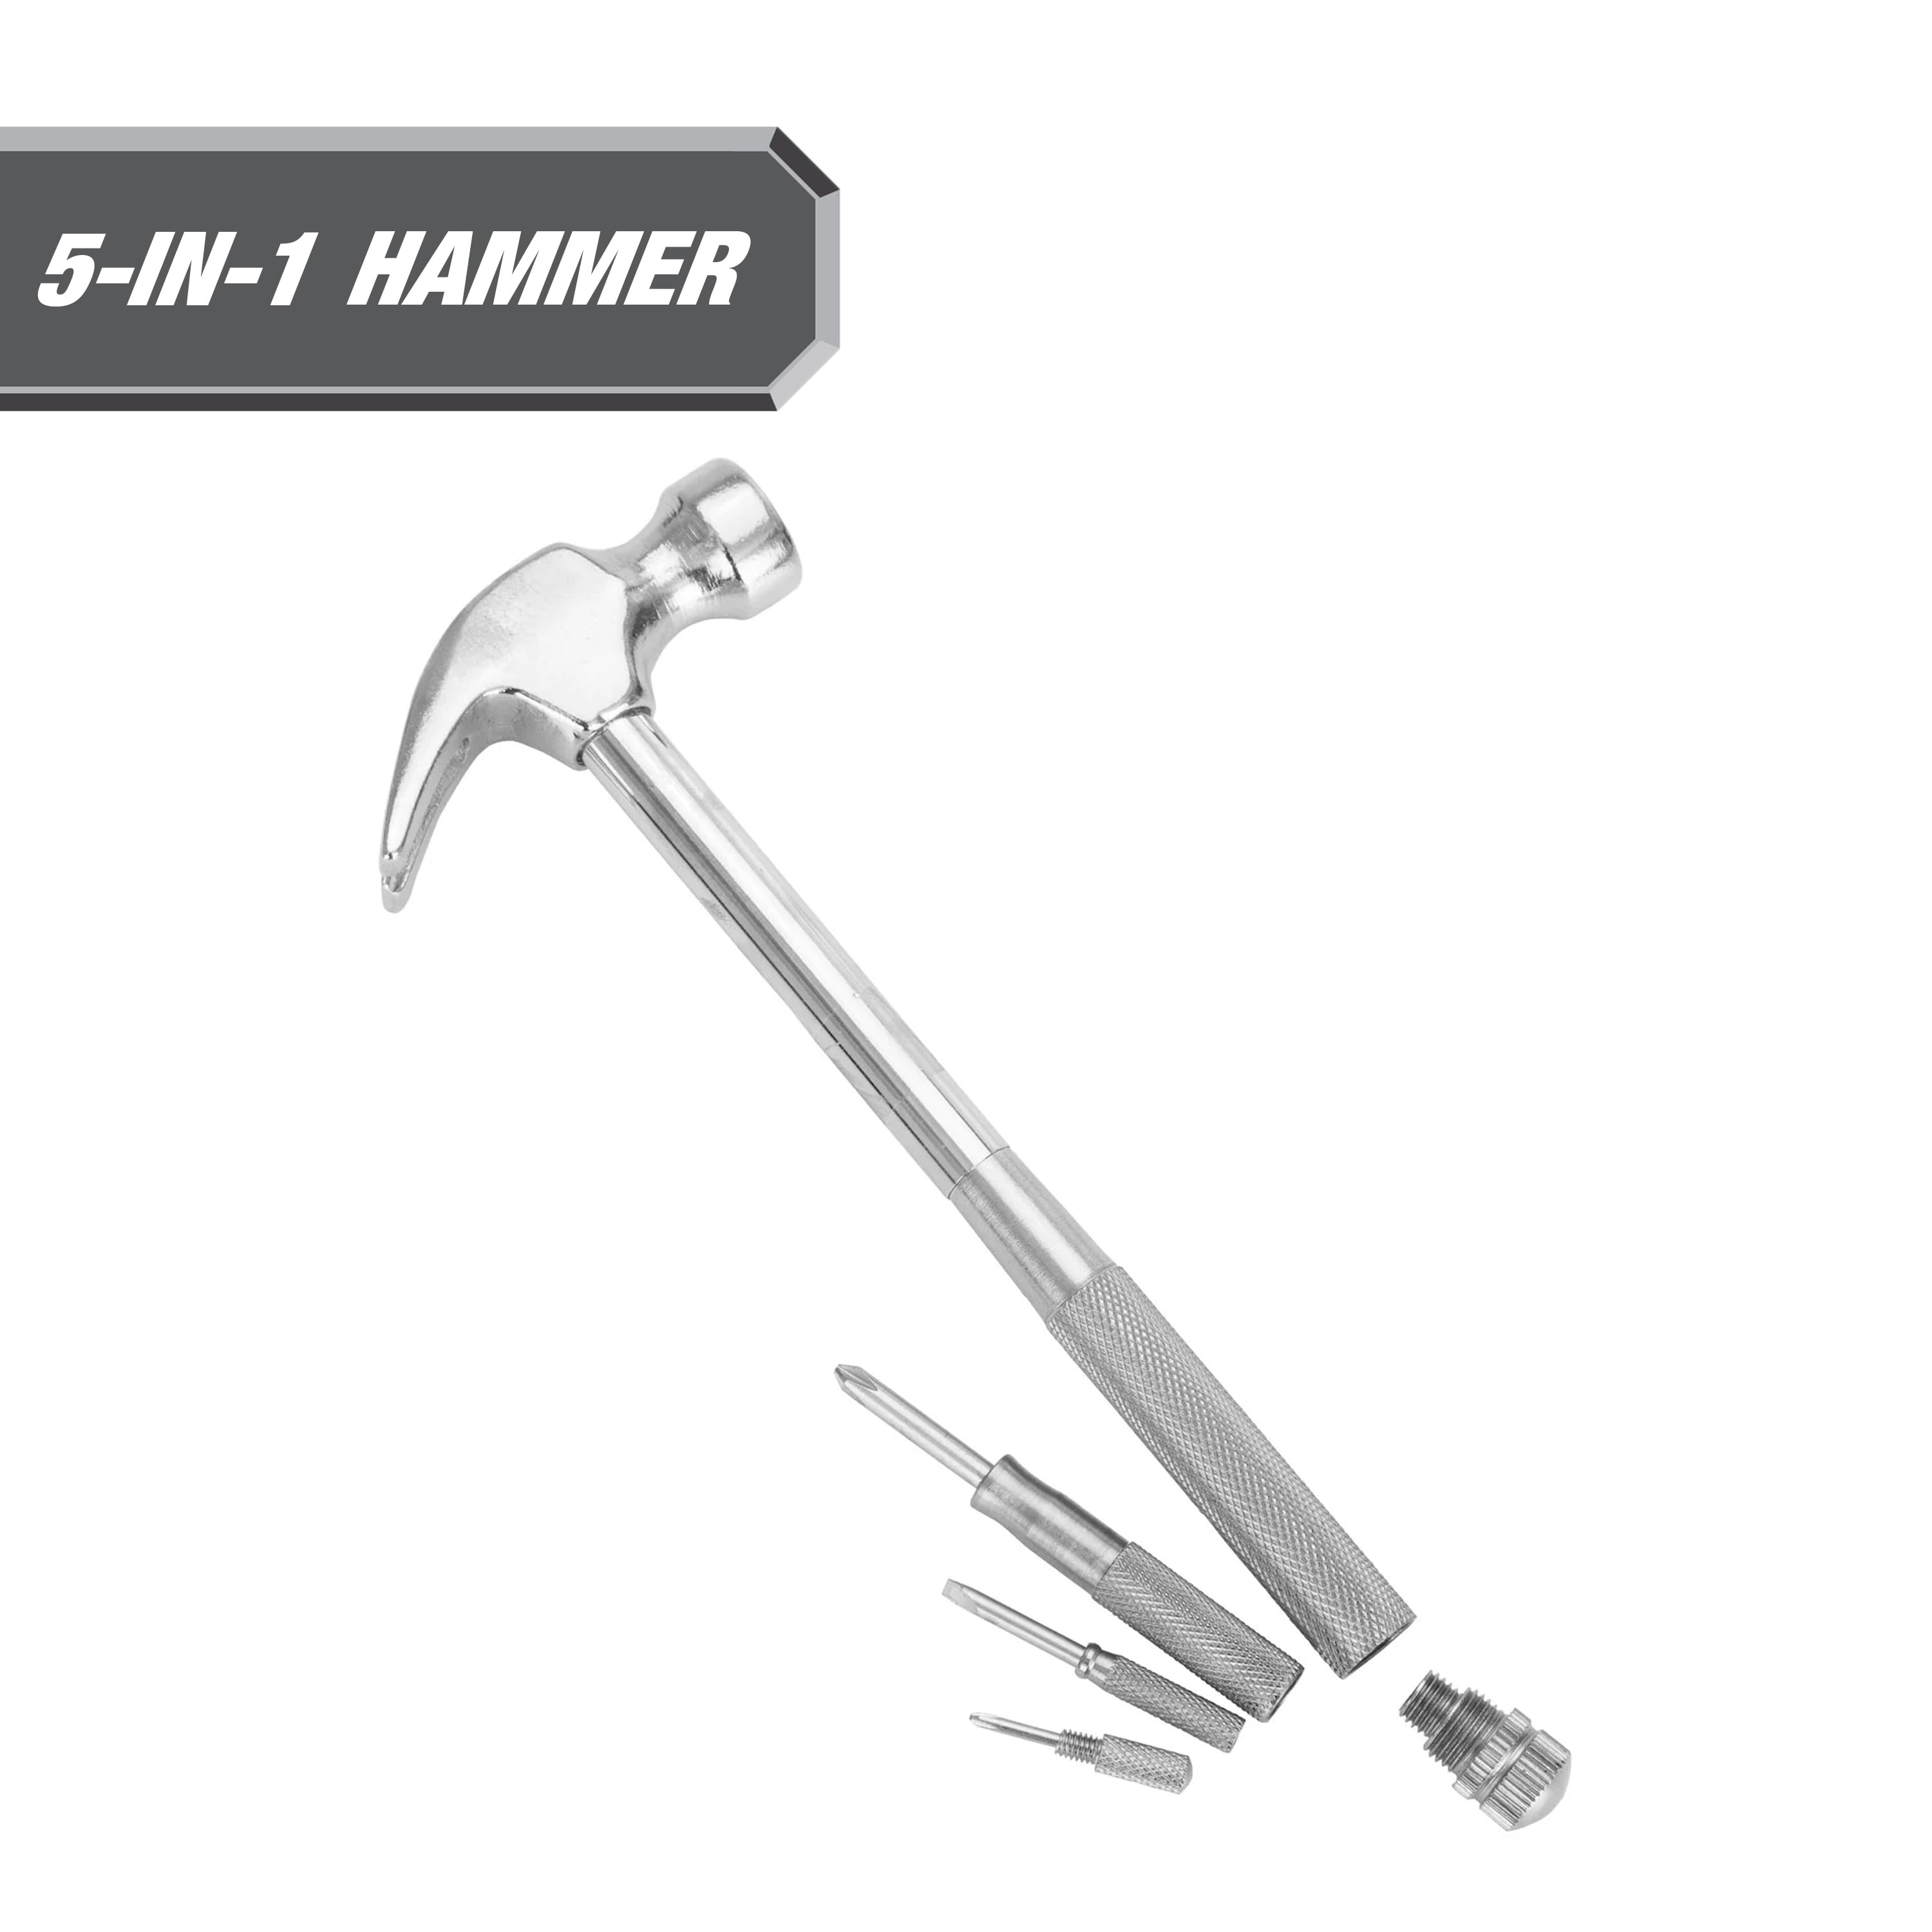 Every Mechanic Should Have a Drawer Dedicated to These Hammers